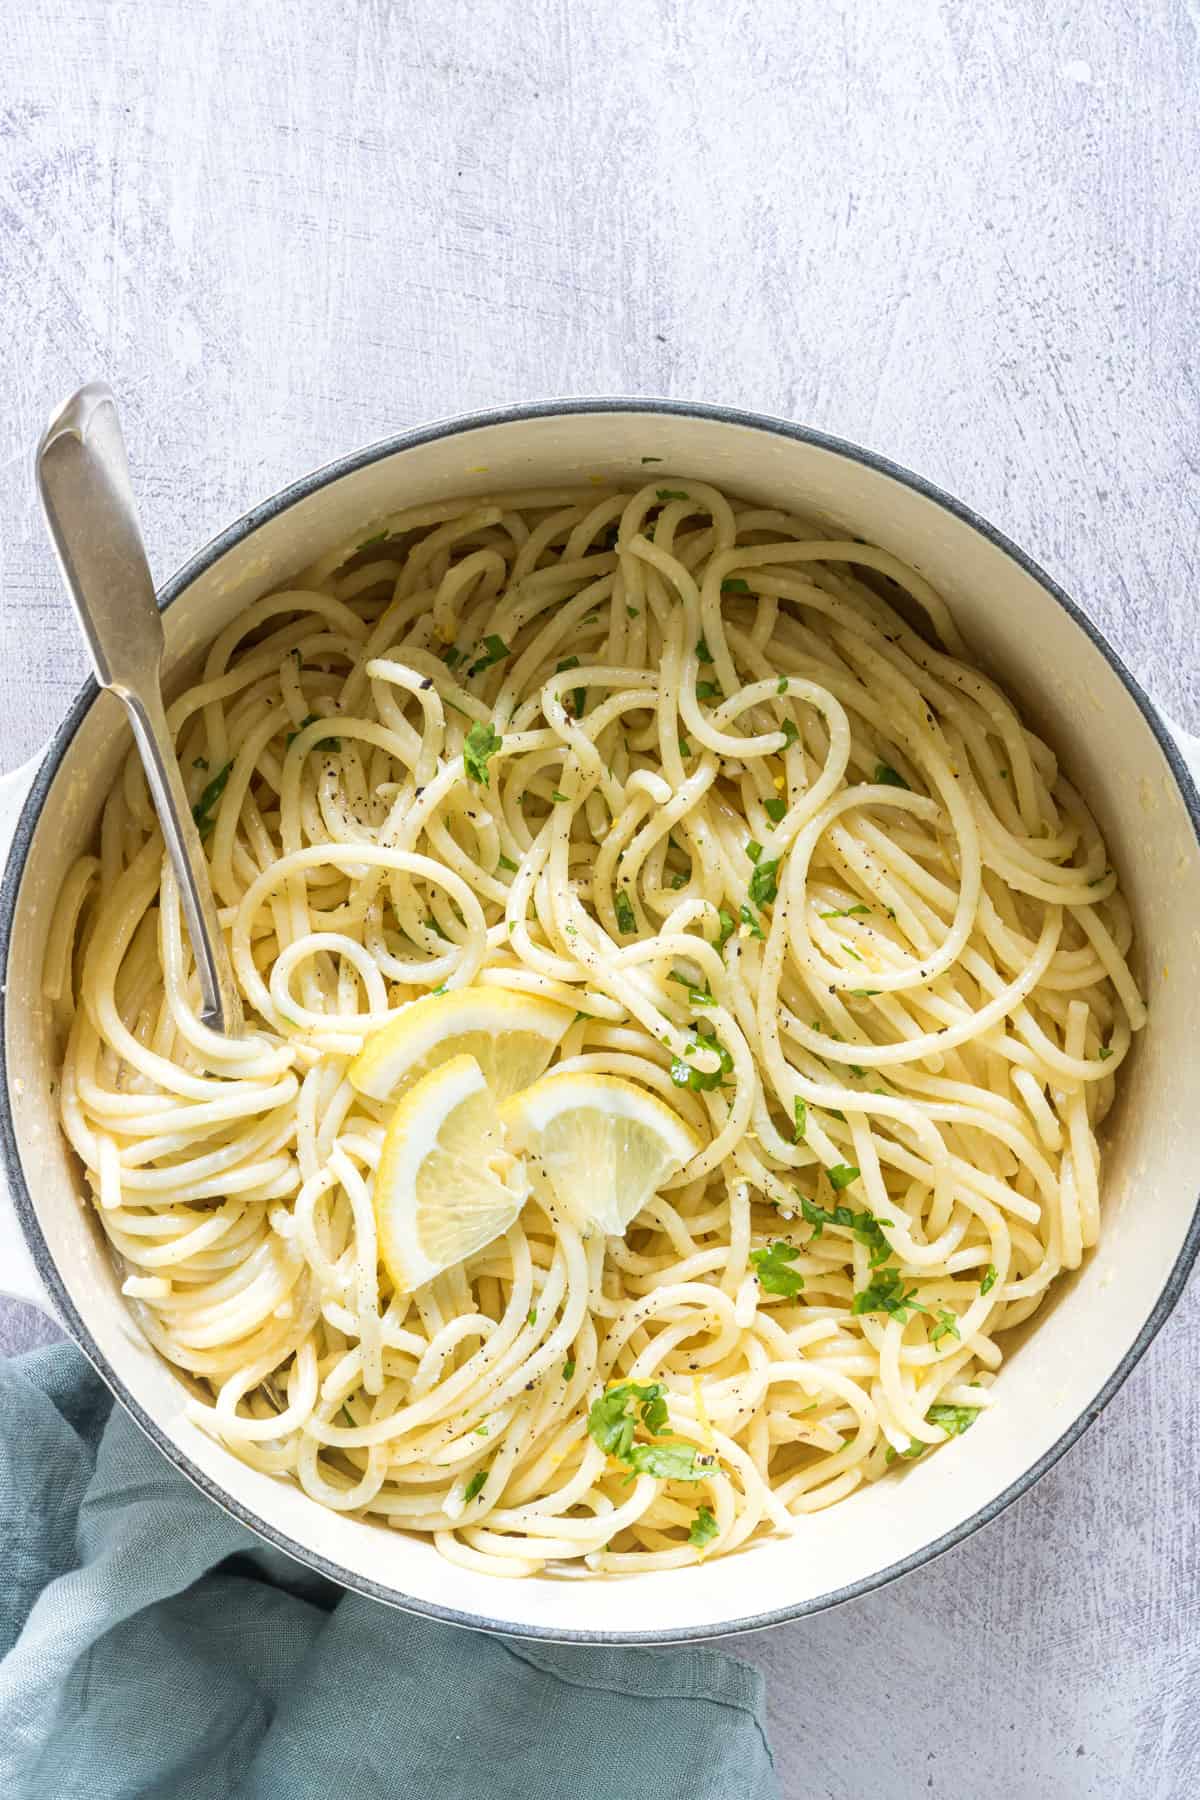 a dish of garlic butter pasta garnished with parsley and lemon wedges